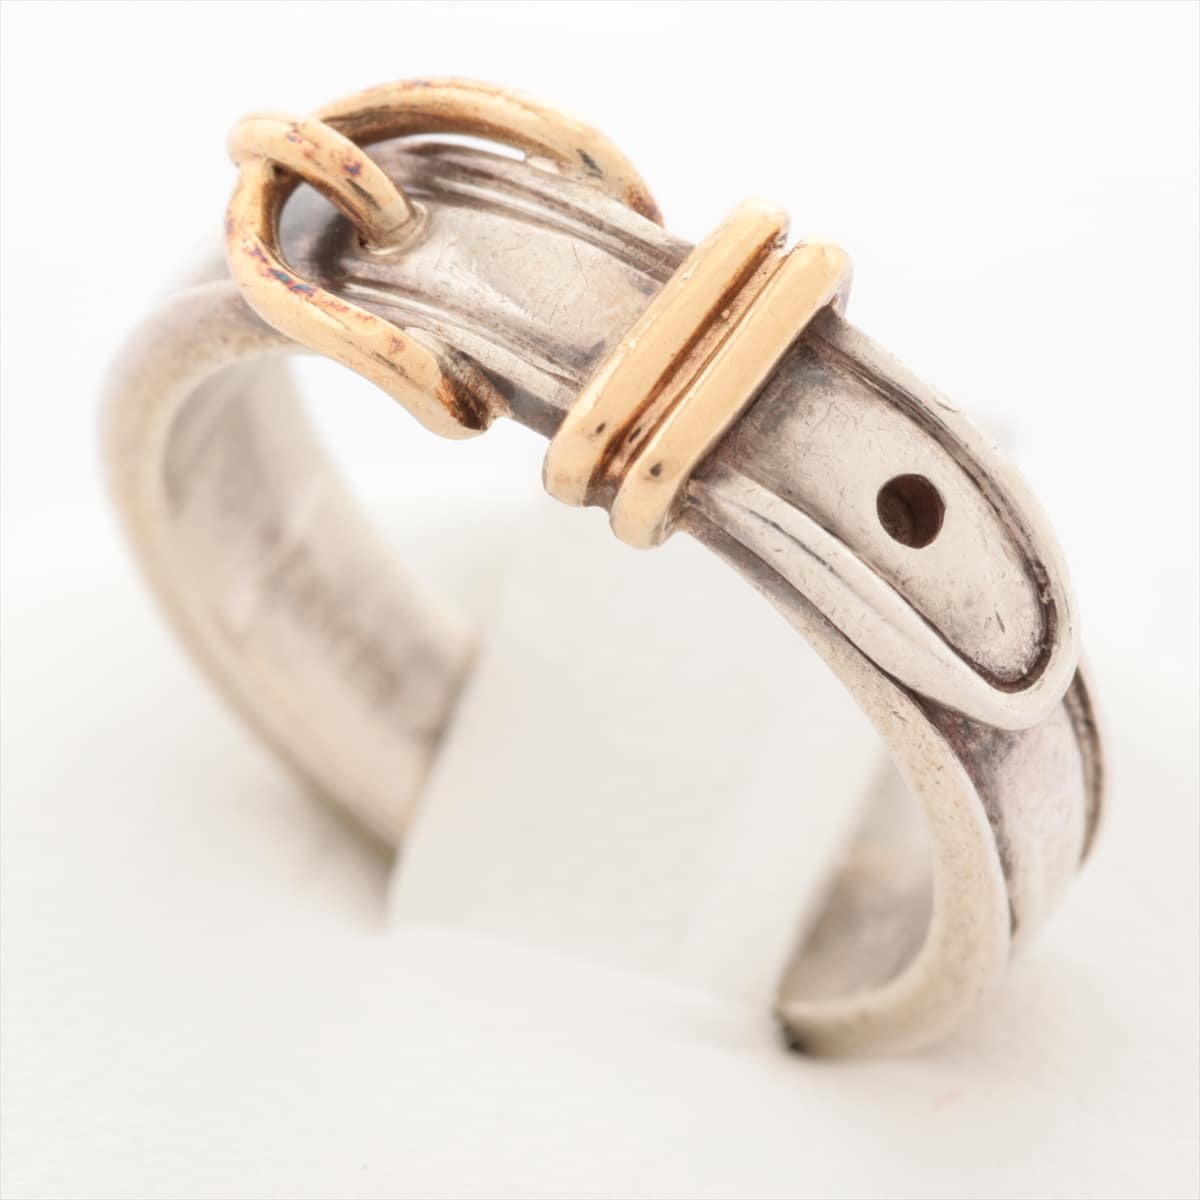 Hermès San Tulle rings 54 925×750 5.4g Gold × Silver Rubbed, discoloration